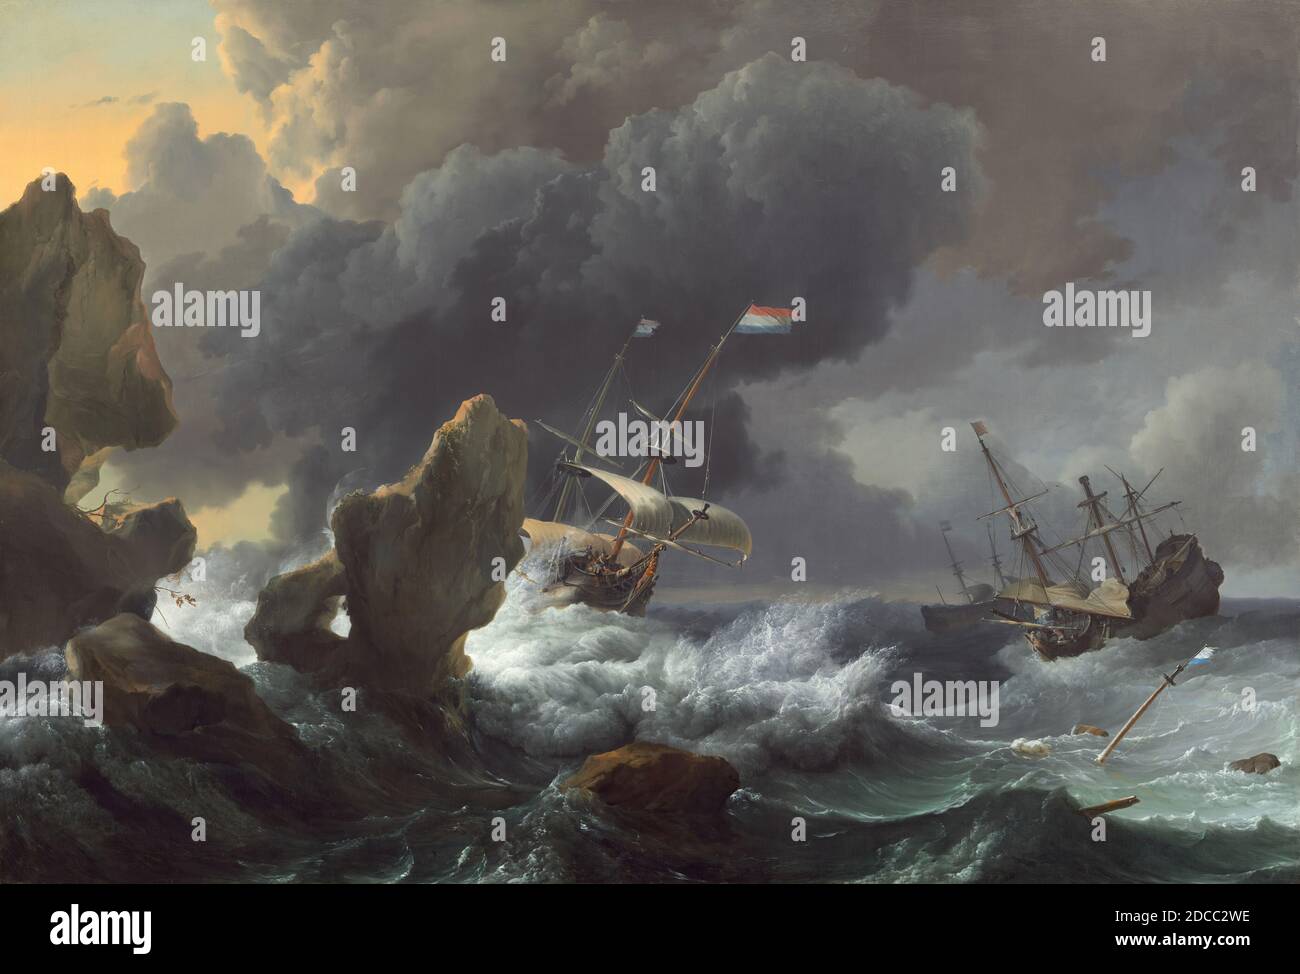 Ludolf Backhuysen, (artist), Dutch, 1630 - 1708, Ships in Distress off a Rocky Coast, 1667, oil on canvas, overall: 114.3 x 167.3 cm (45 x 65 7/8 in.), framed: 147.3 x 146.1 x 6.4 cm (58 x 57 1/2 x 2 1/2 in Stock Photo